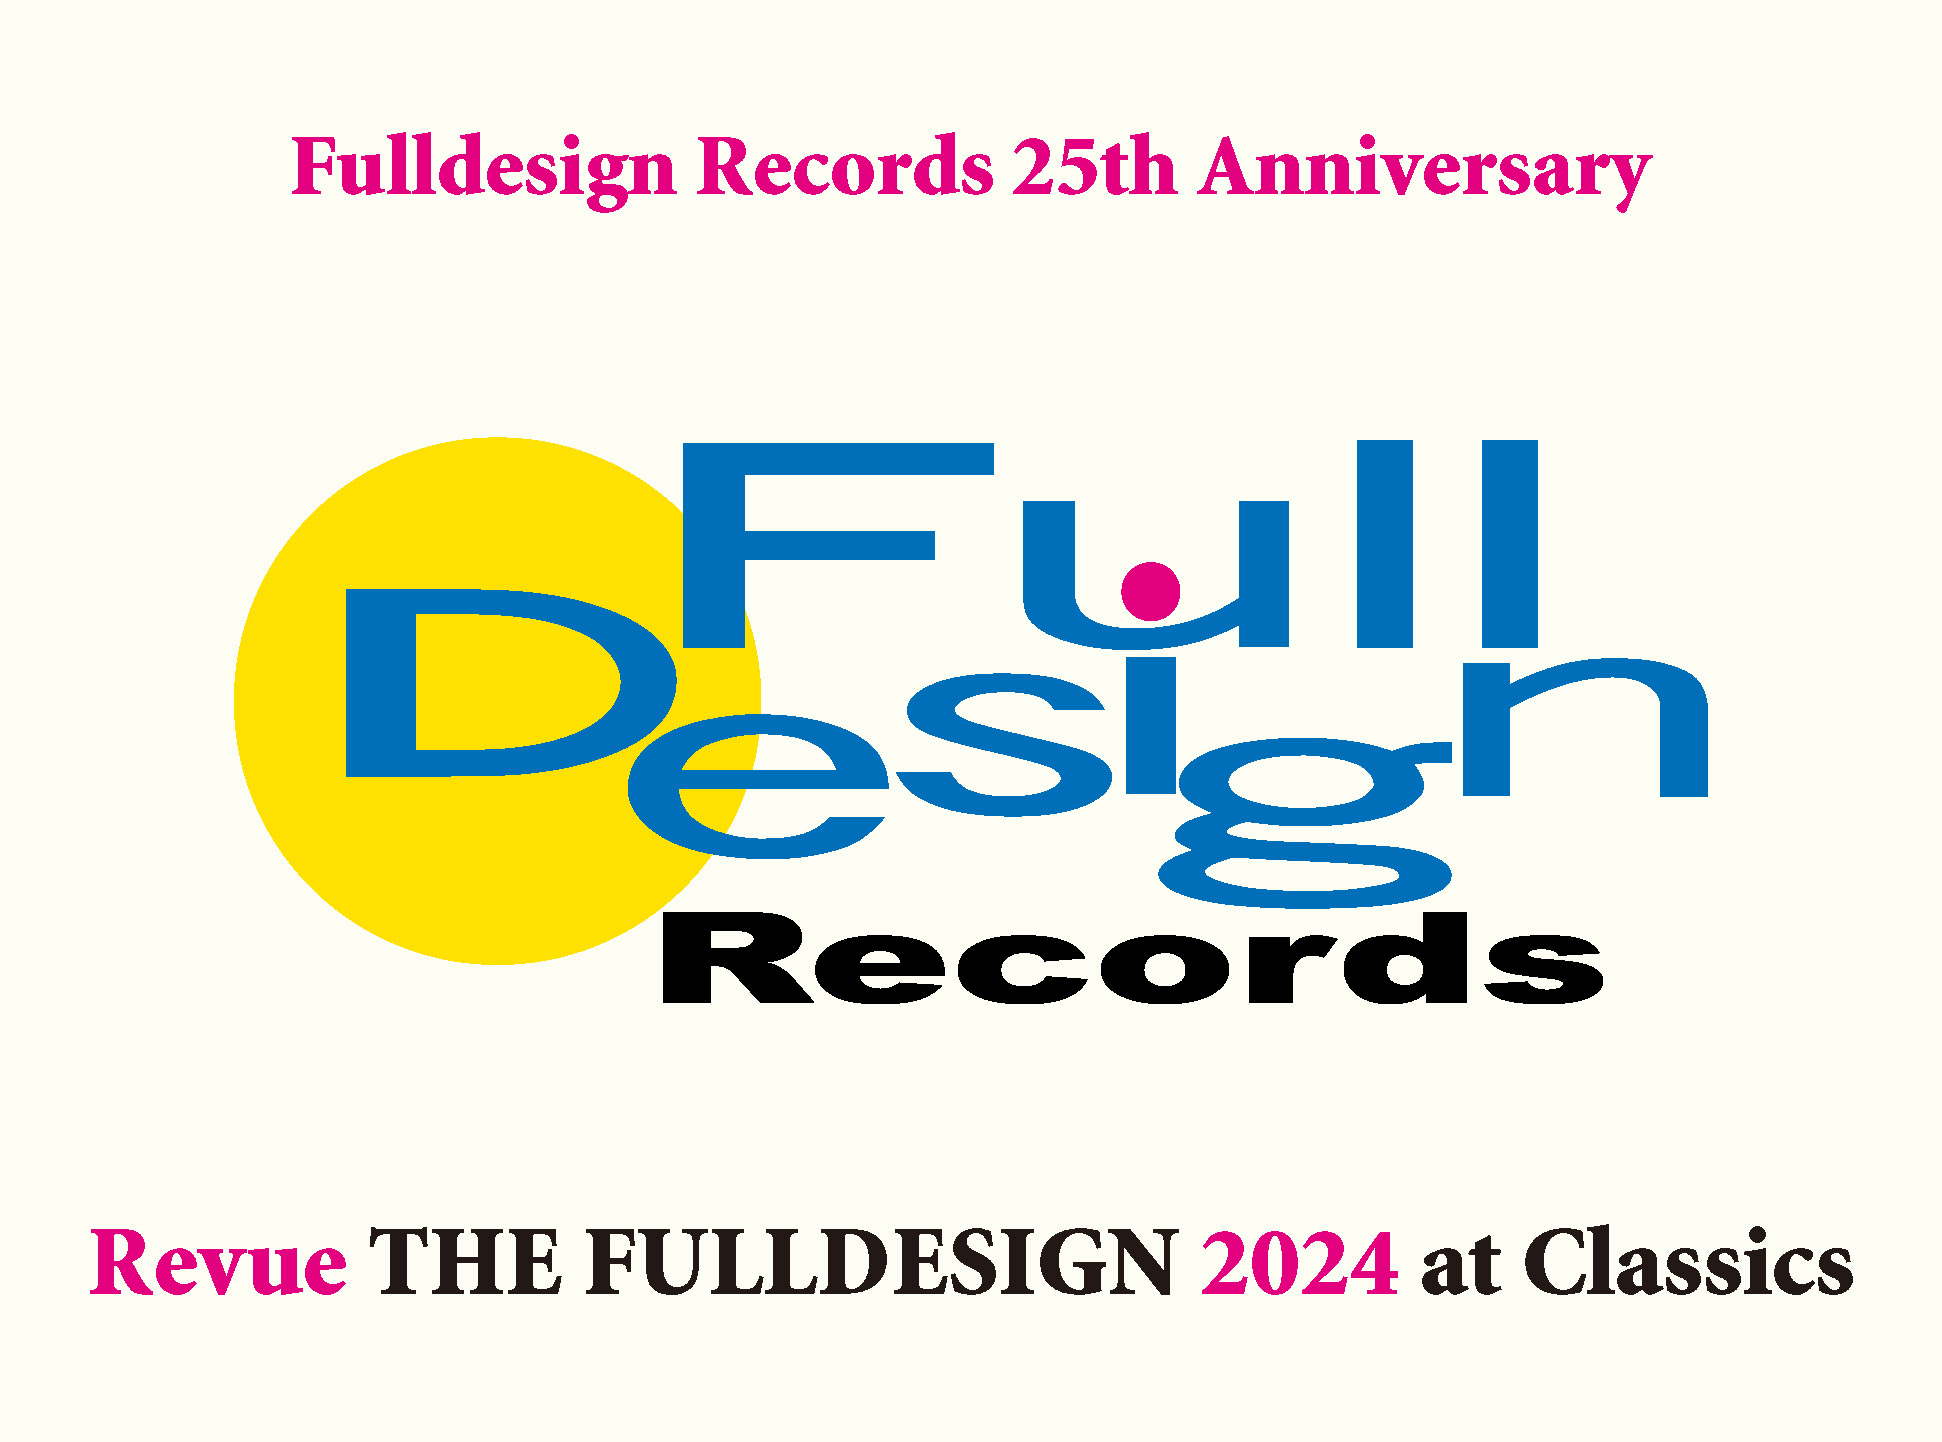 Fulldesign Records 25th Anniversary “Revue THE FULLDESIGN 2024 at Classics”夜の部